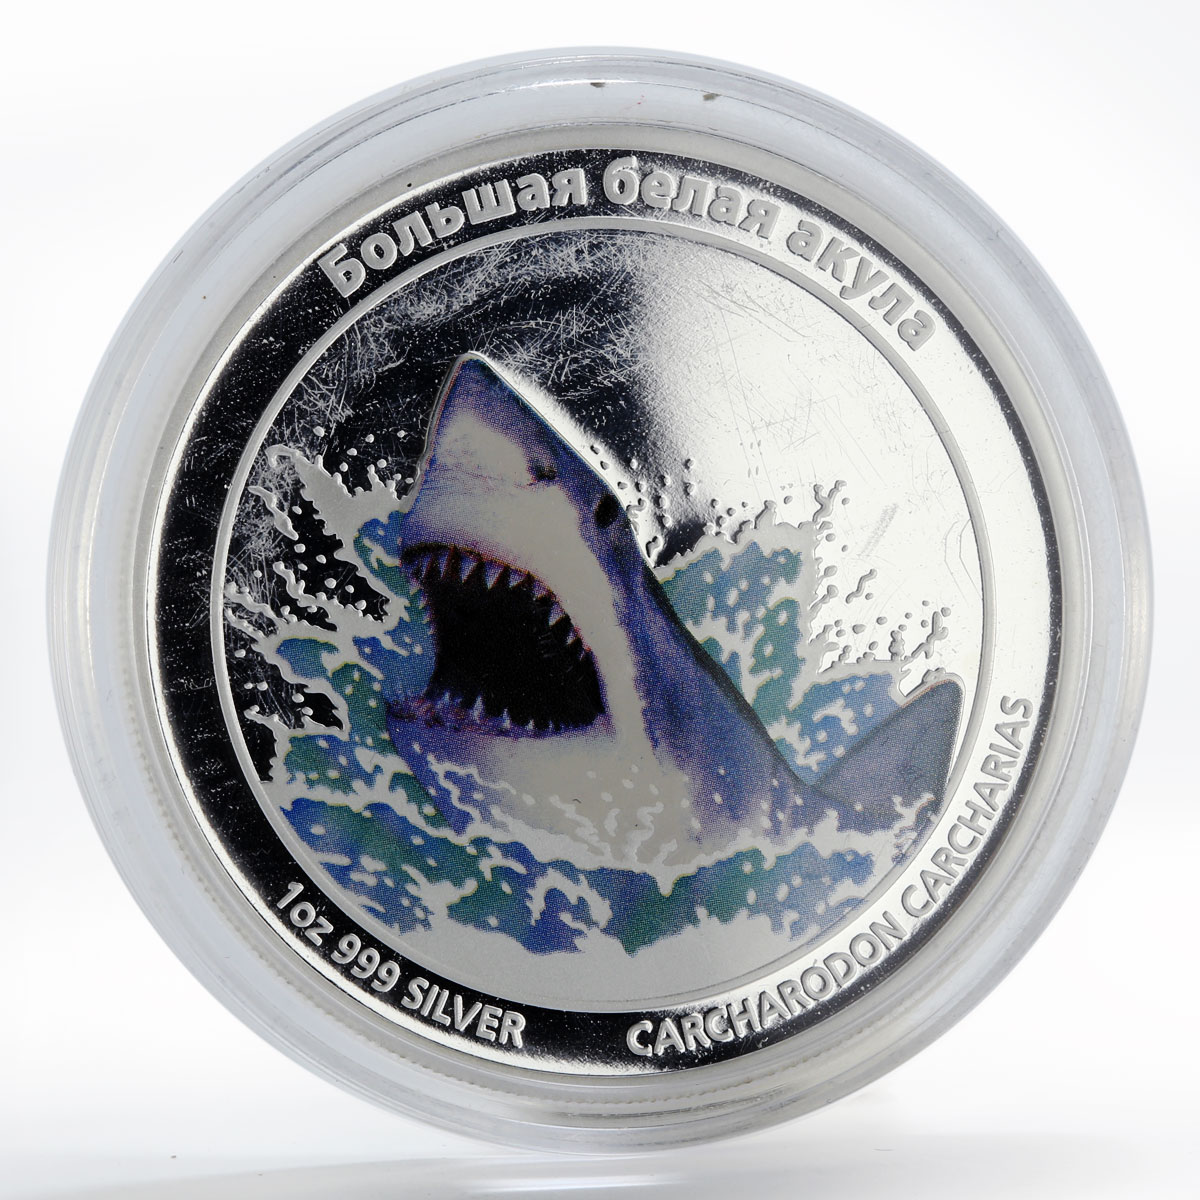 Tuvalu 1 dollar Great white shark colored proof silver coin 2011